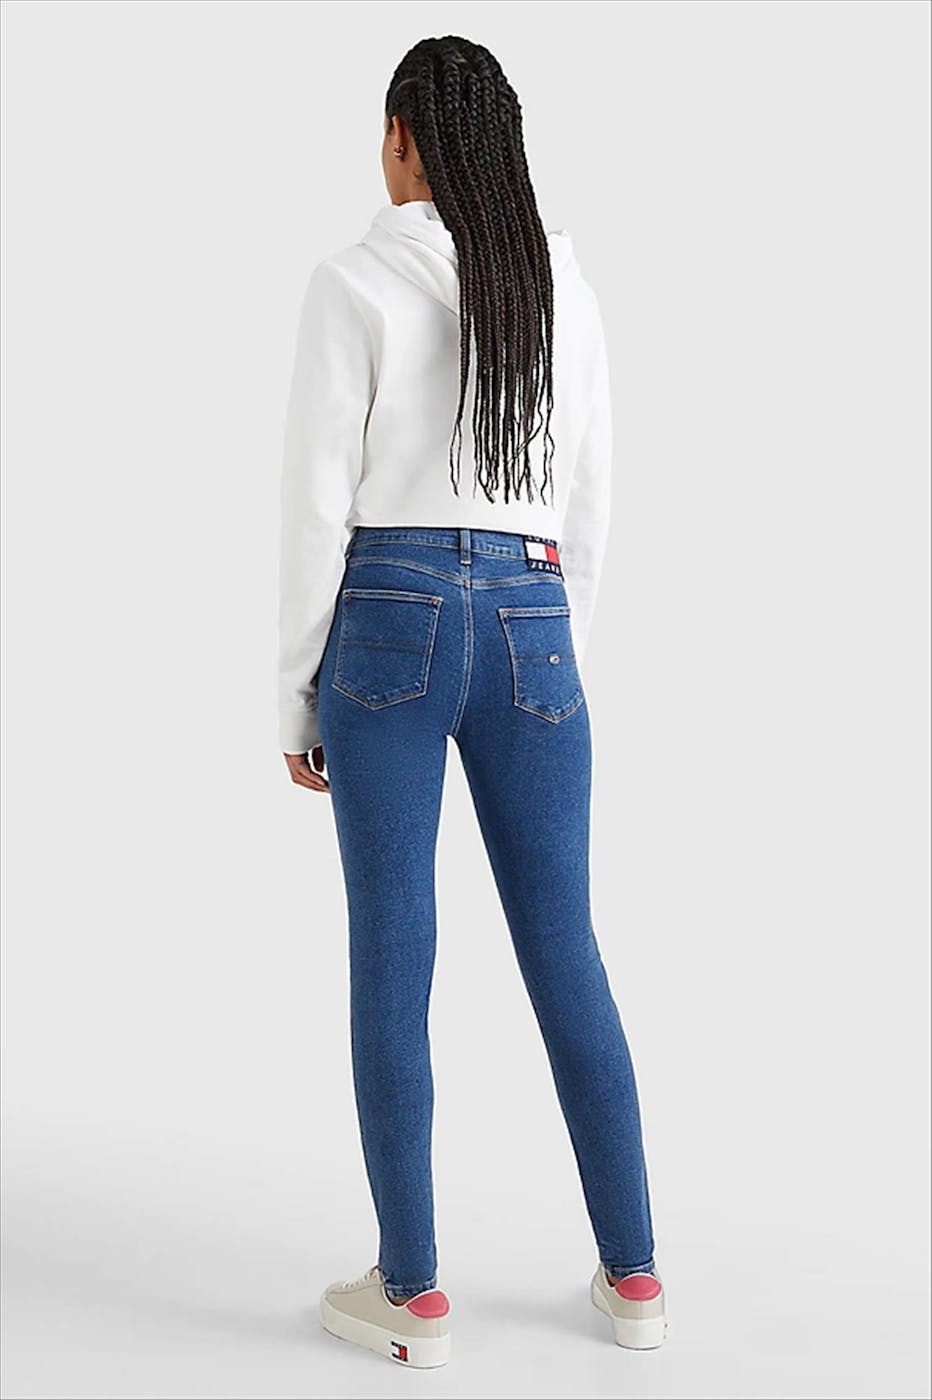 Tommy Jeans - Donkerblauwe Sylvia Super Skinny jeans